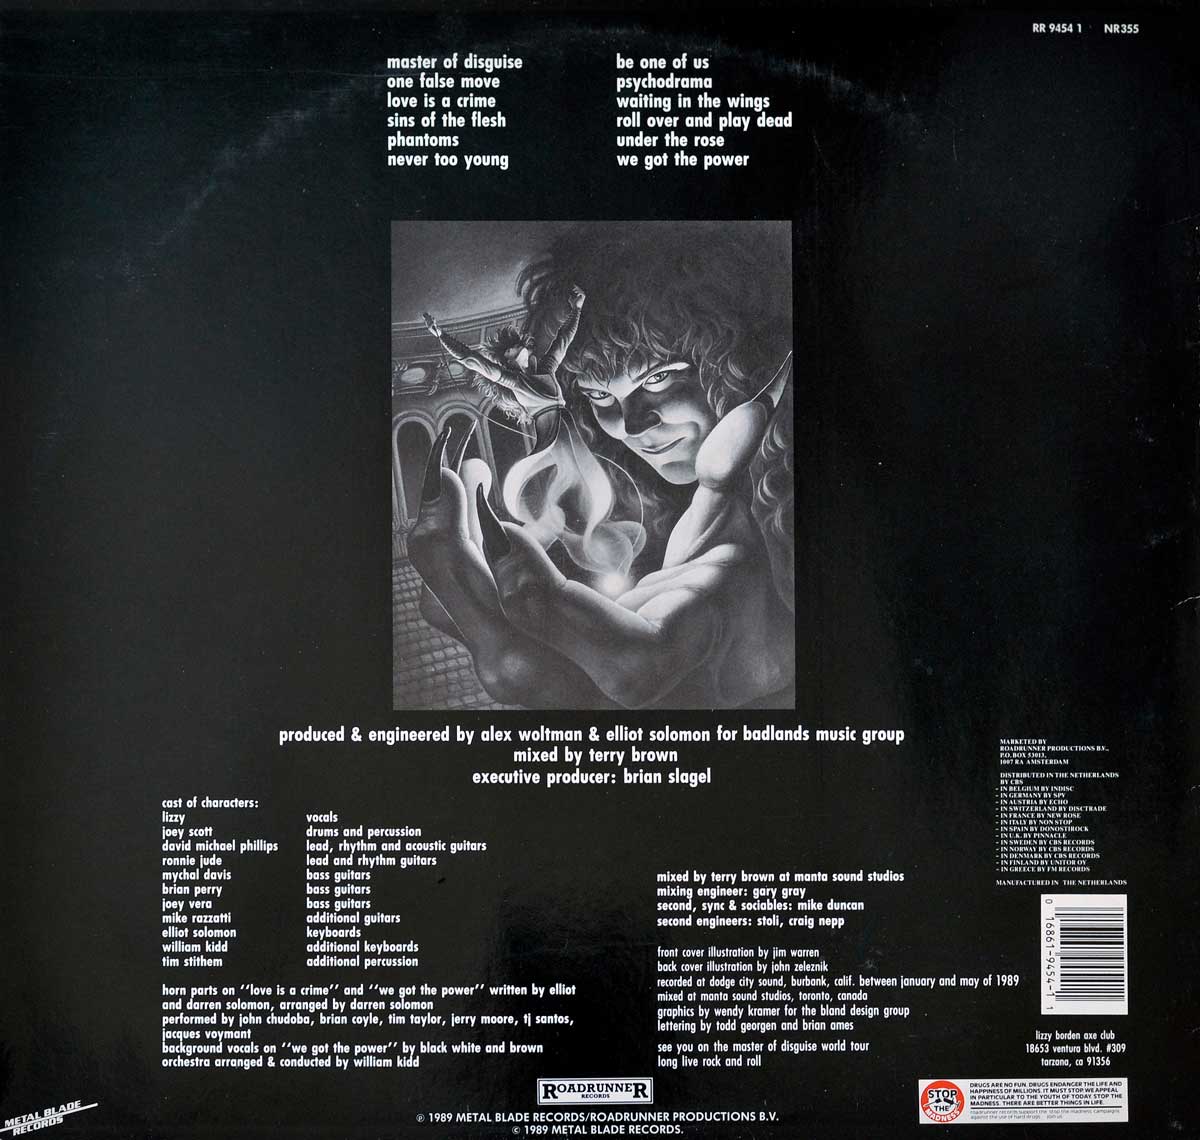 High Resolution Photo Album Back Cover of LIZZY BORDEN Master of Disguise https://vinyl-records.nl